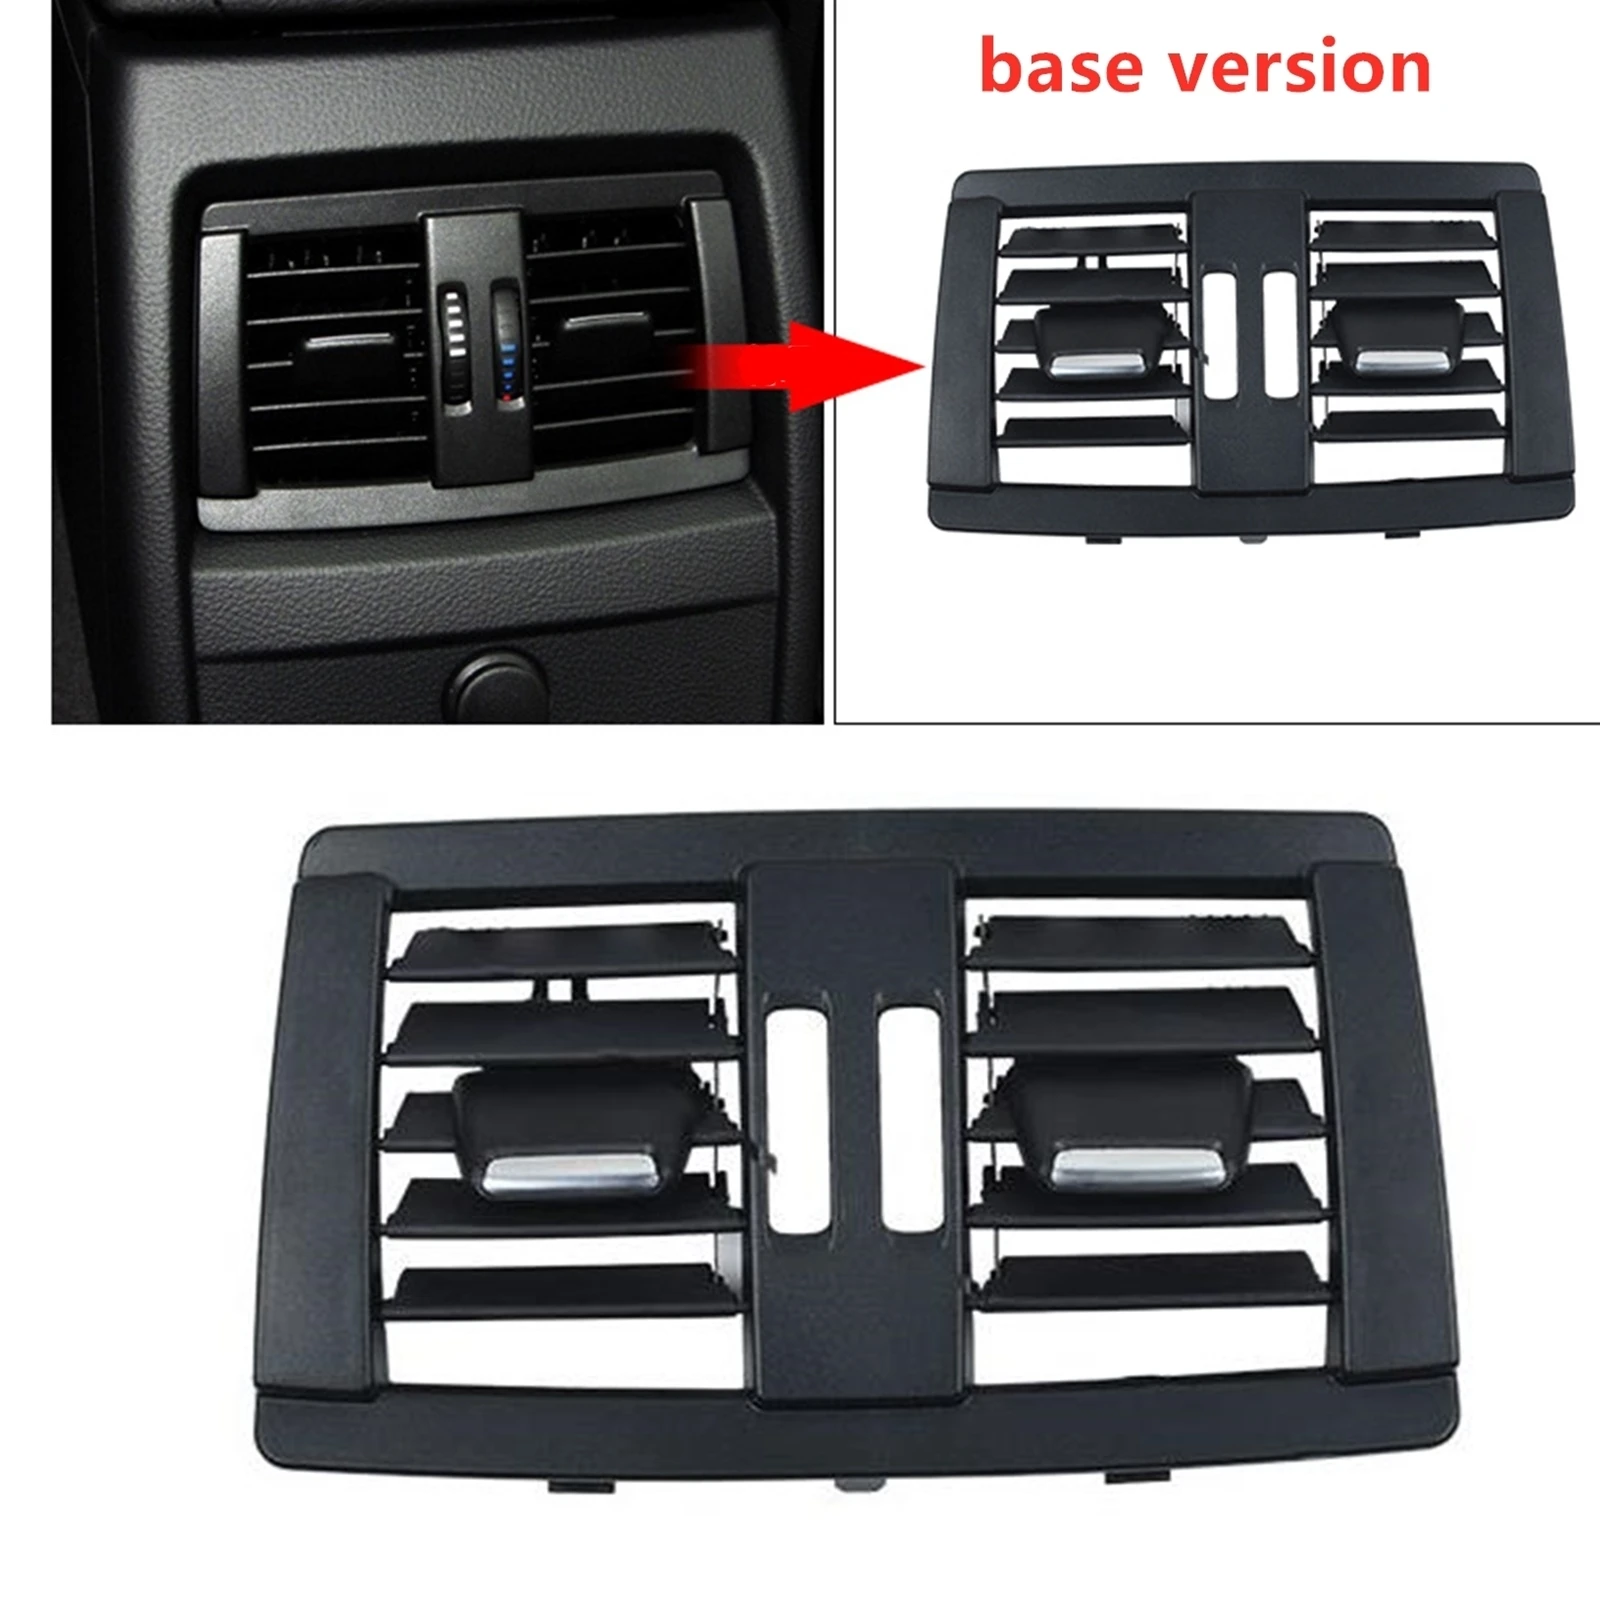 

Rear Center A/C Air Outlet Vent Cover Grill For BMW 3 Series F30 F35 318 320 2014-2020 Interior Dashboard Conditioning Grille